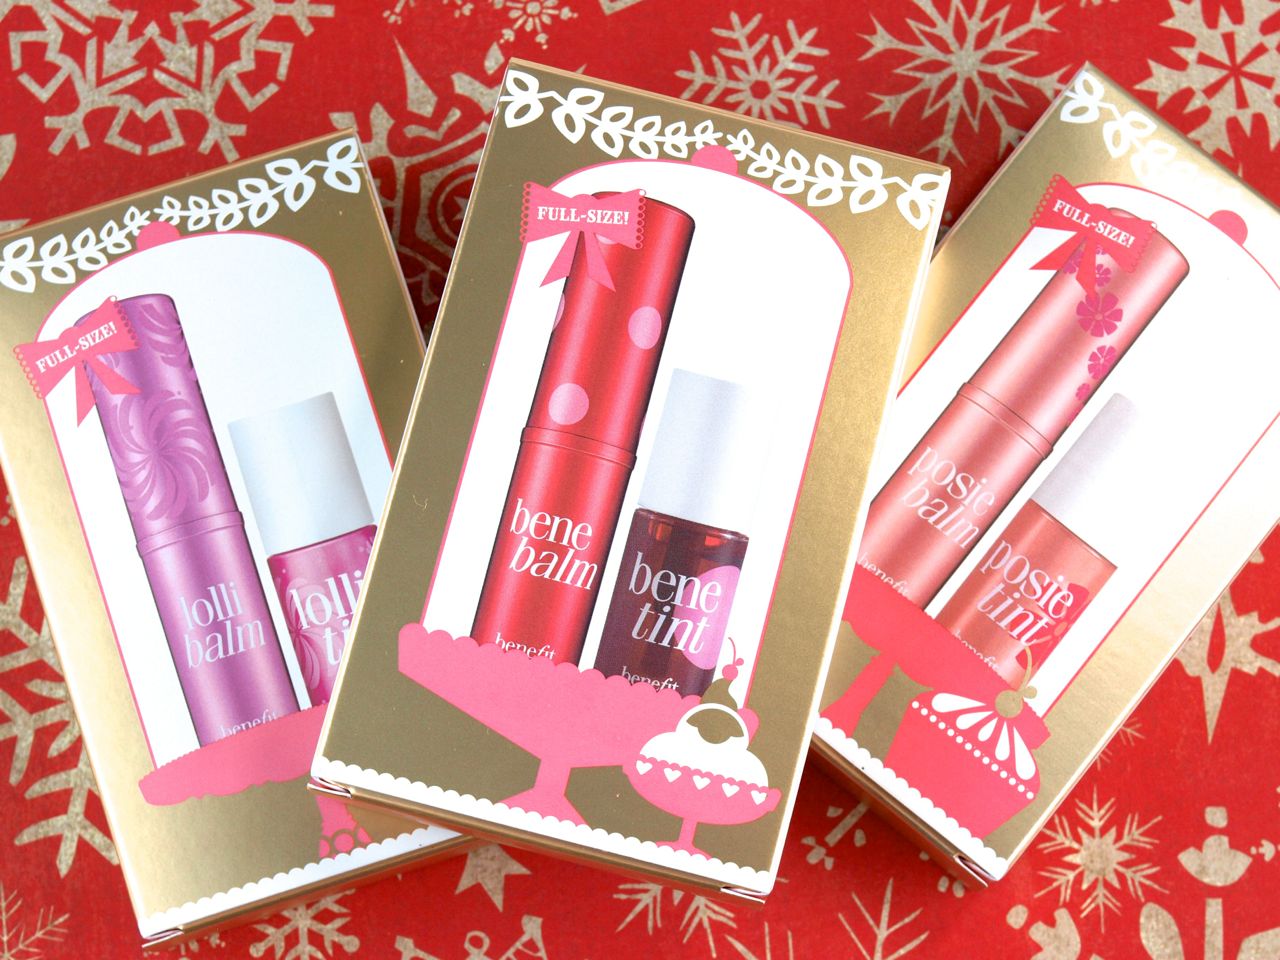 Benefit Cosmetics 3 Scoops O' Sexy Gift Set: Review and Swatches